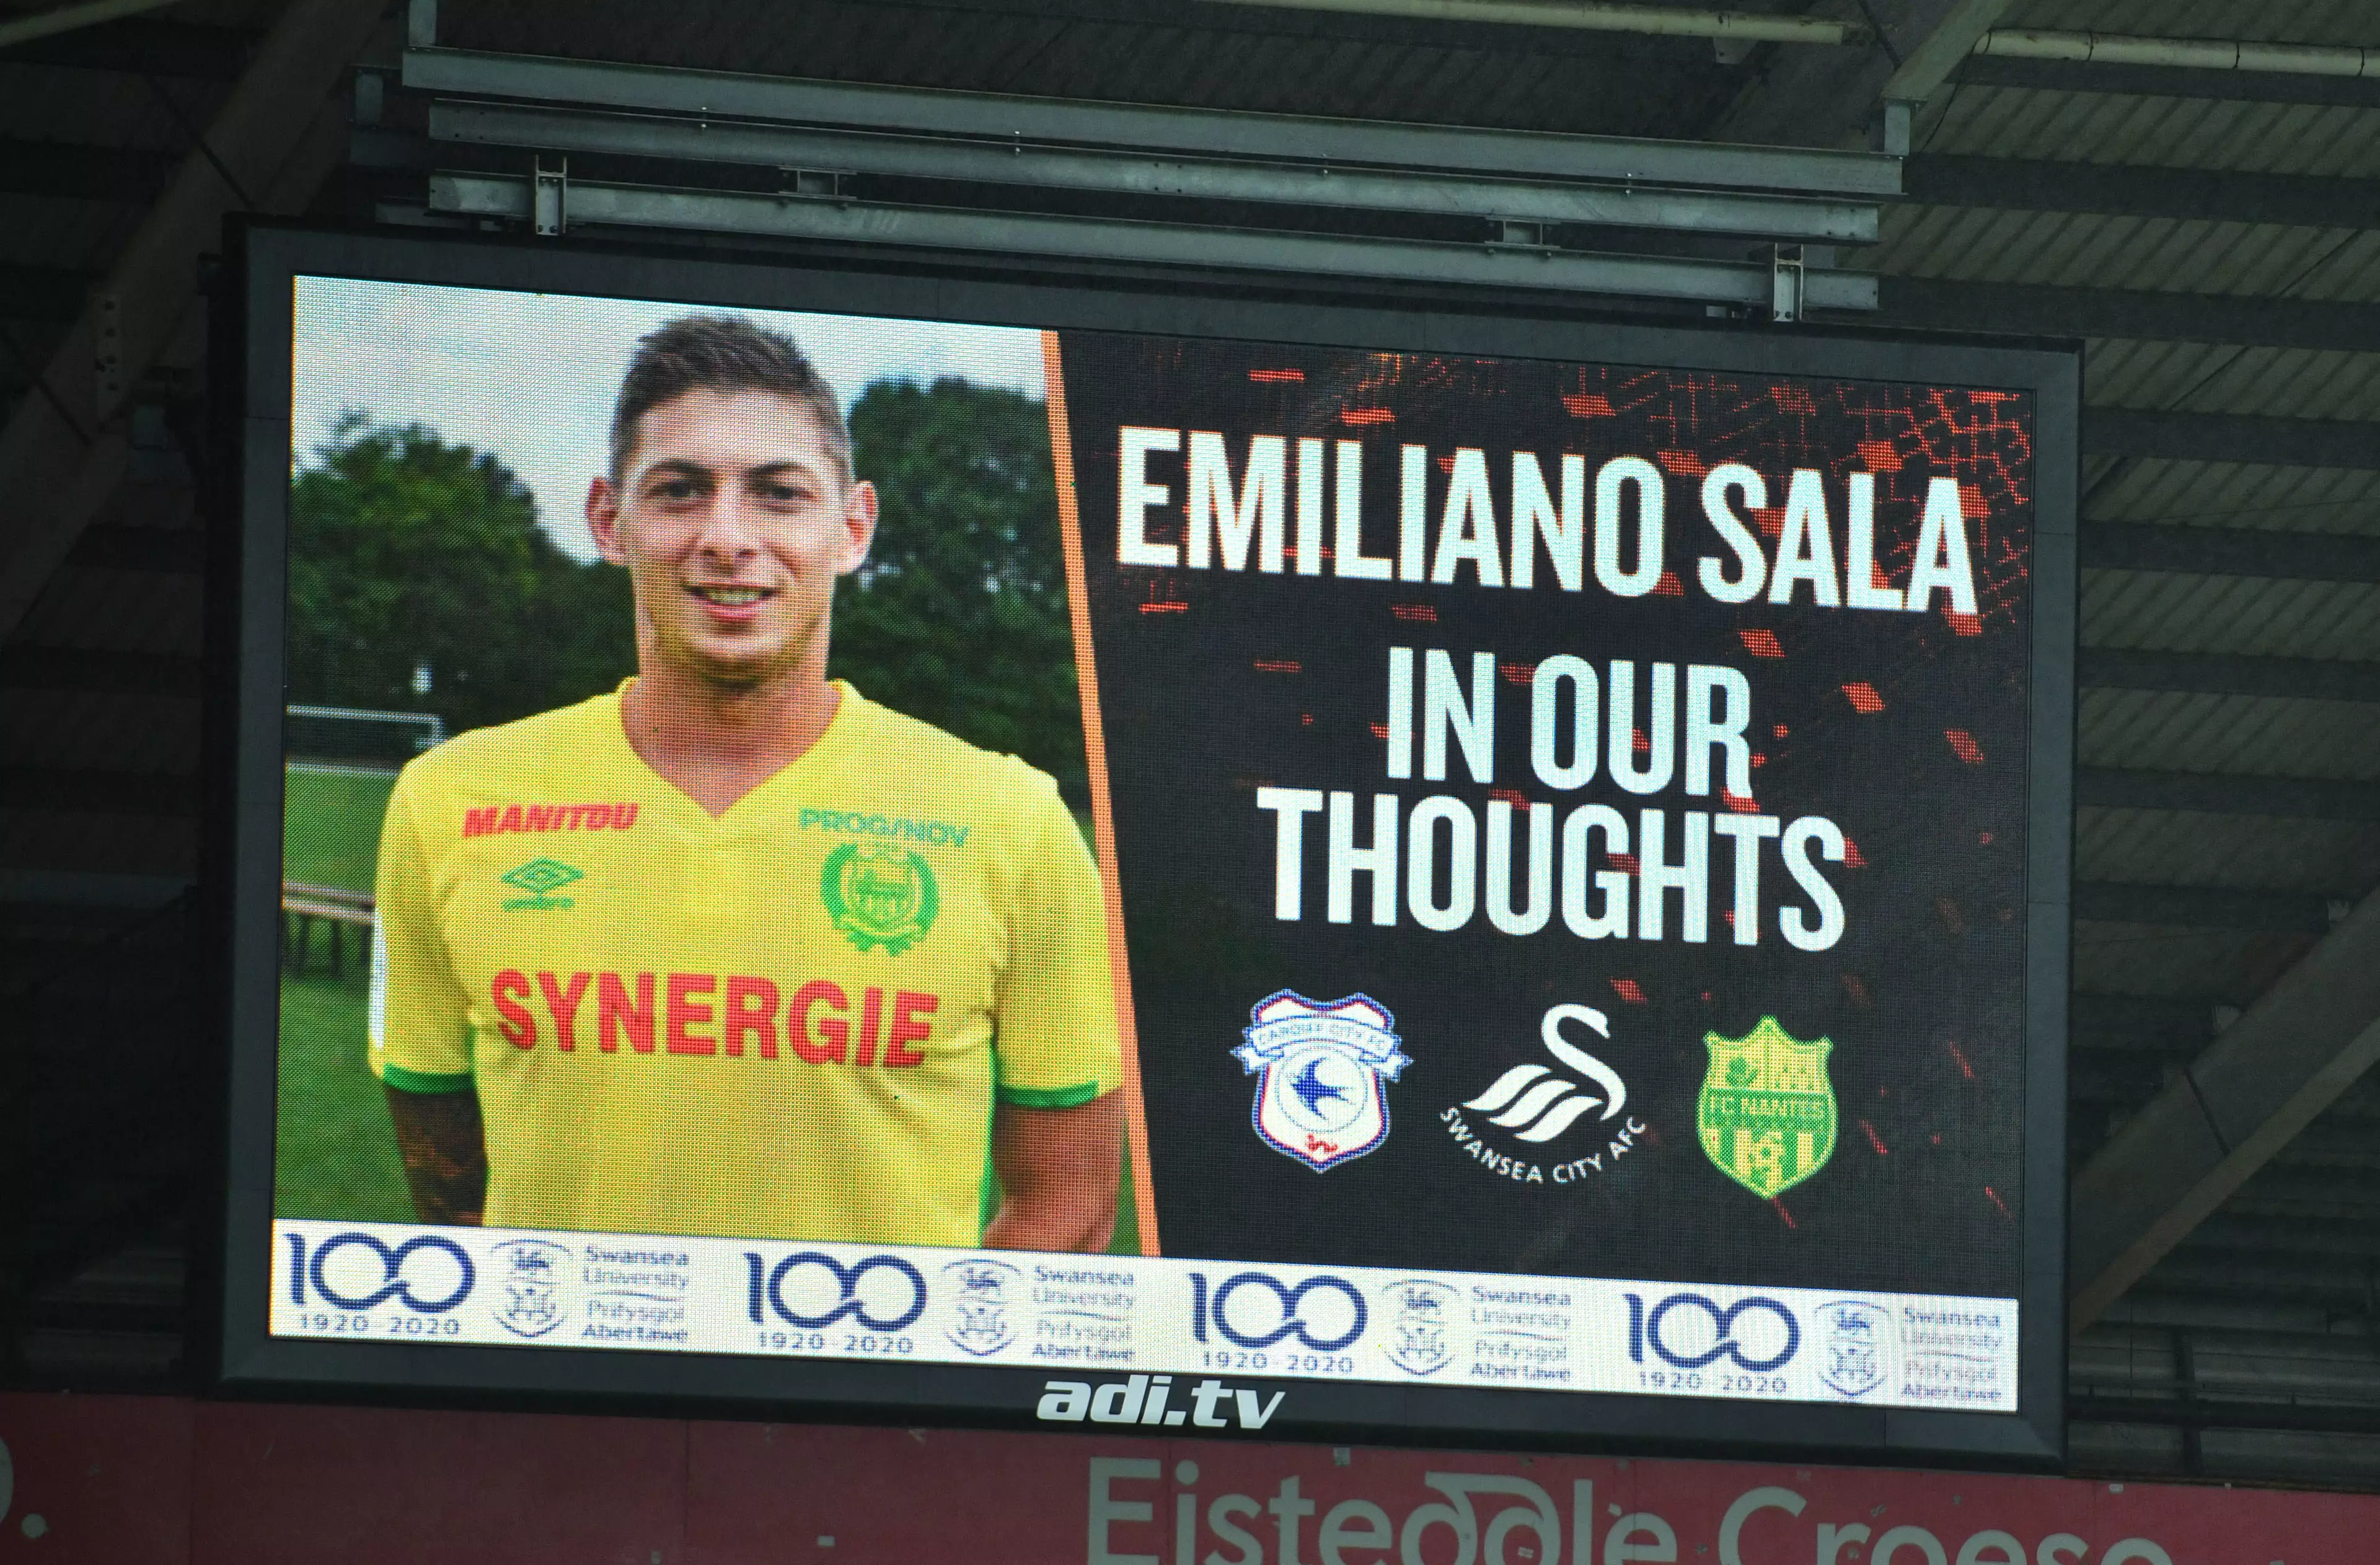 A tribute to Cardiff City striker Emiliano Sala shown on the big screen during the FA Cup fourth round match at the Liberty Stadium.